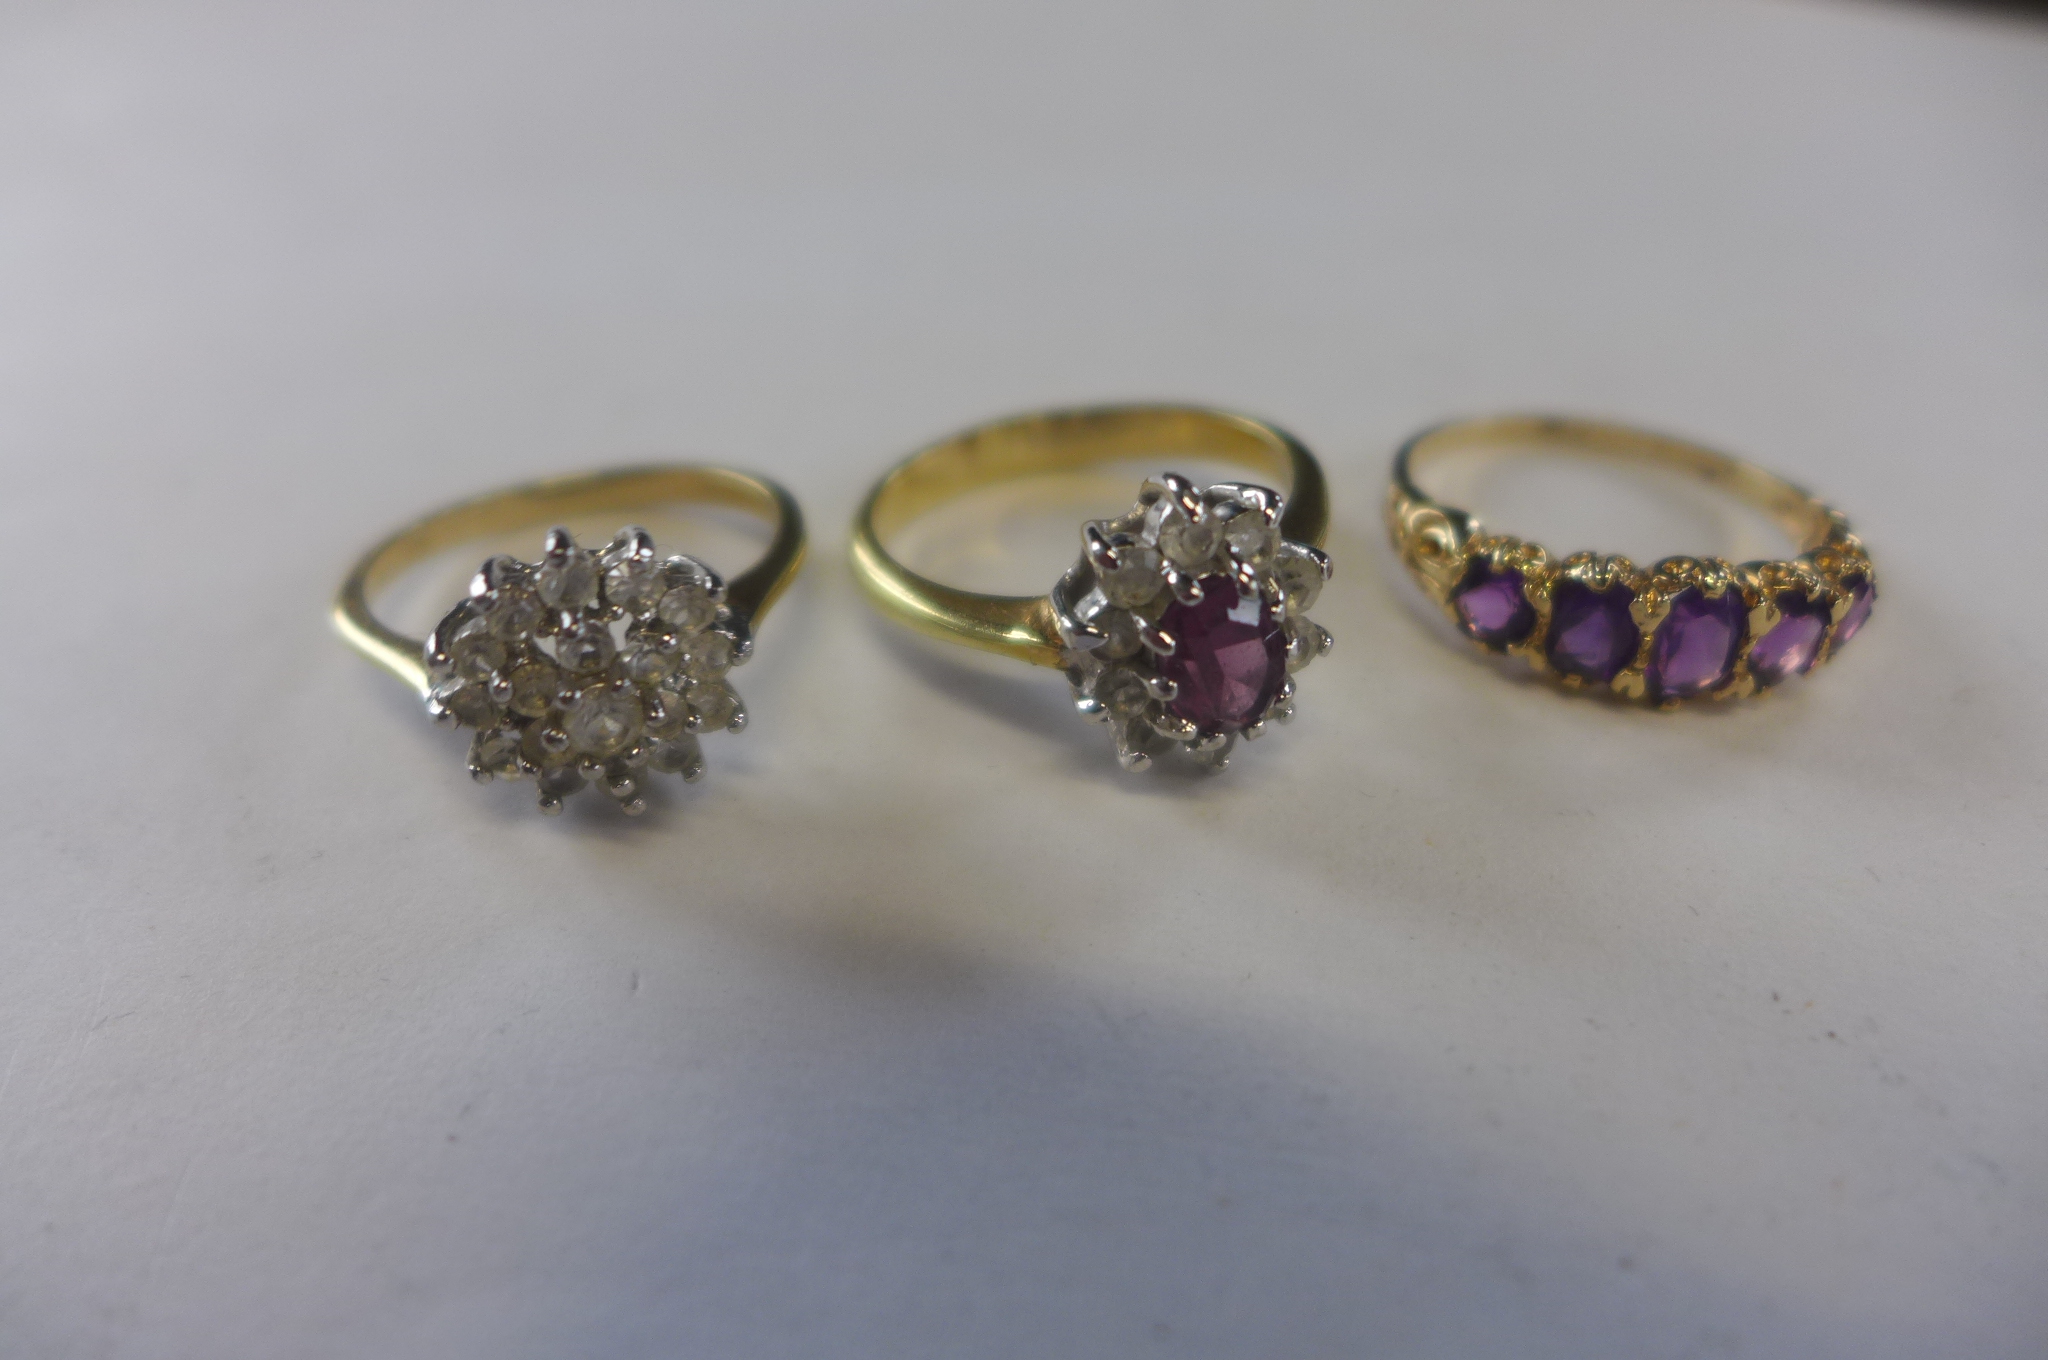 A hallmarked 9ct gold ring, approx 2.4 grams, and two unmarked gilt rings, approx 5.3 grams